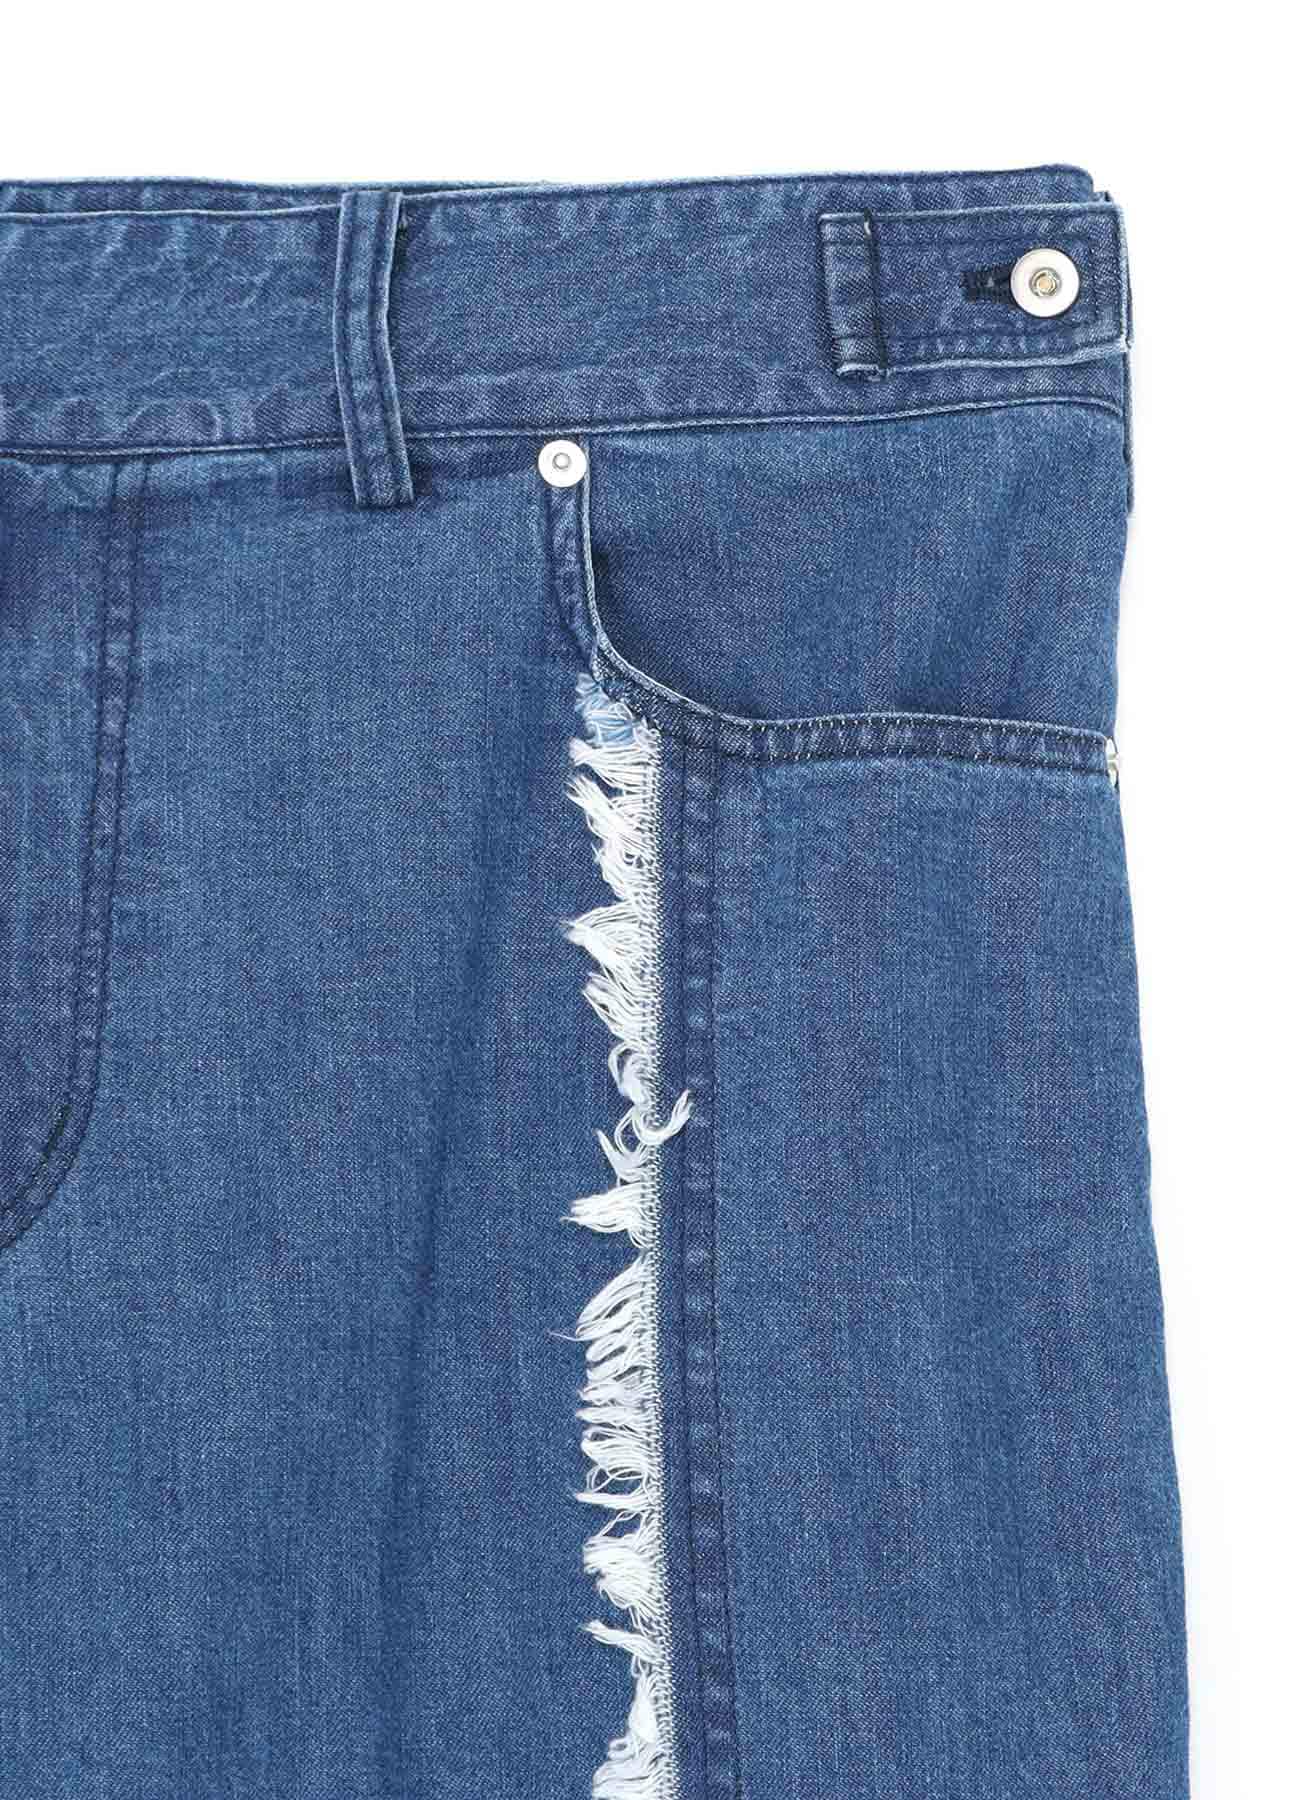 8OZ DENIM PANTS WITH RIPPED LINE DETAIL(M Light Blue): S'YTE｜THE